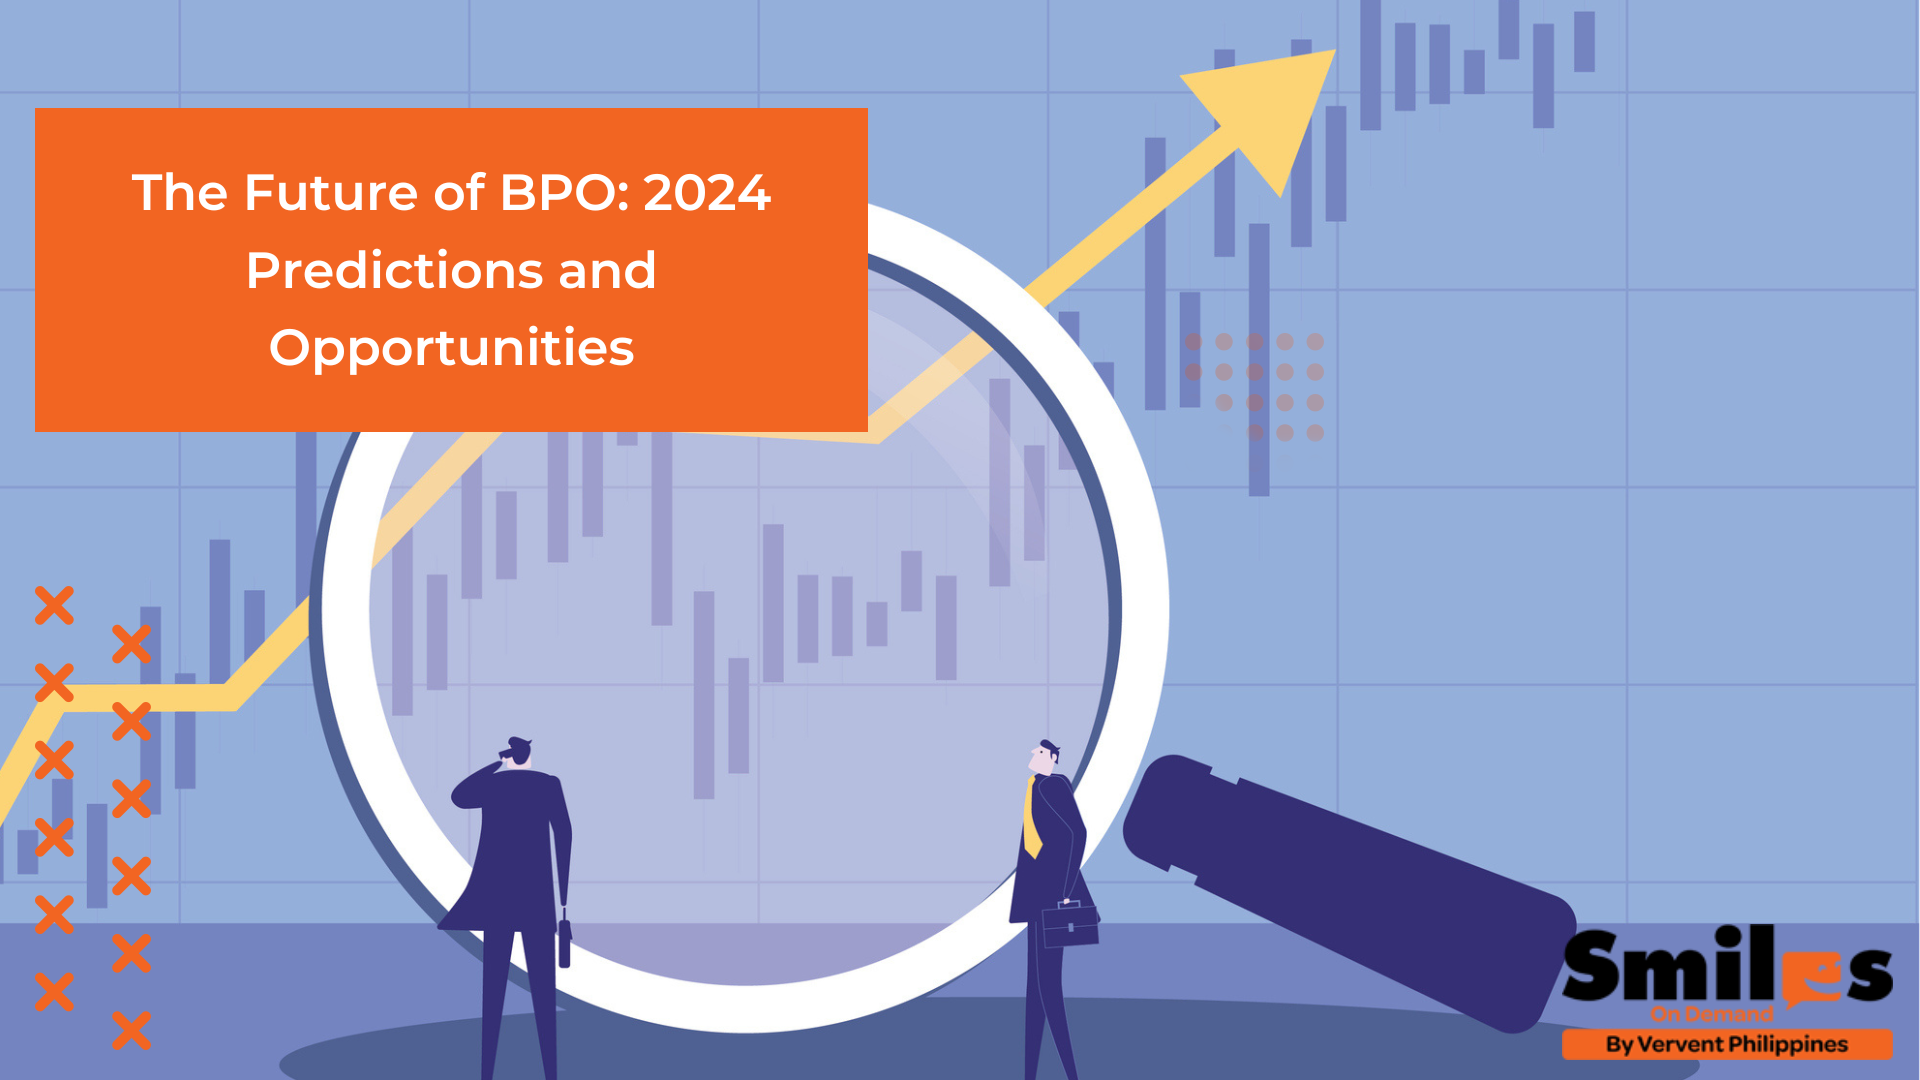 The Future of BPO 2024 Predictions and Opportunities